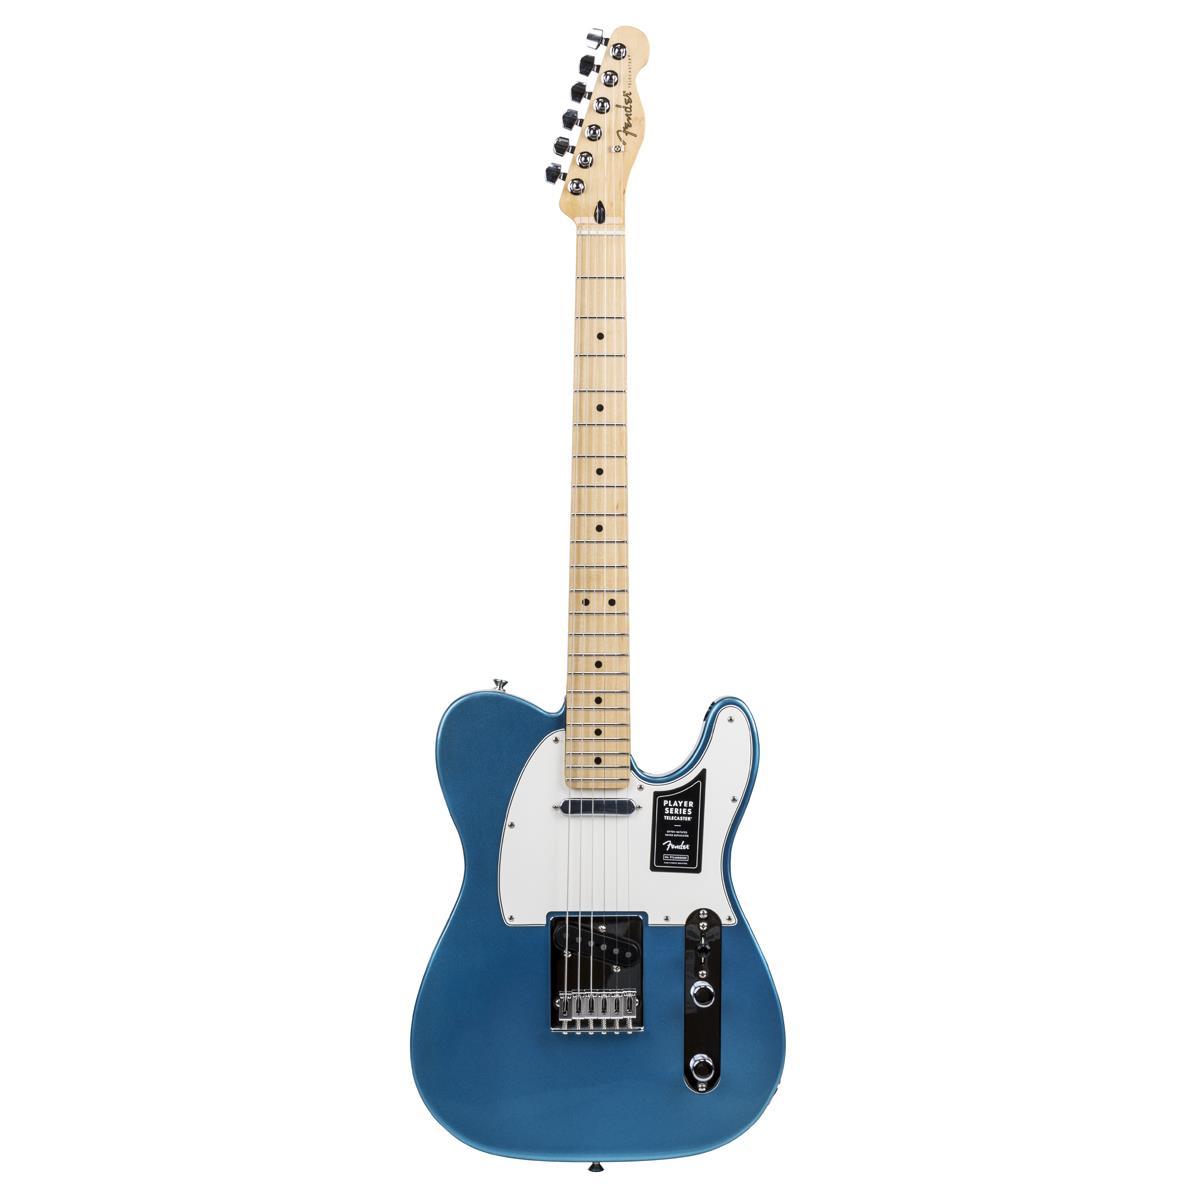 Fender Limited Edition Player Telecaster Electric Guitar for $539 Shipped